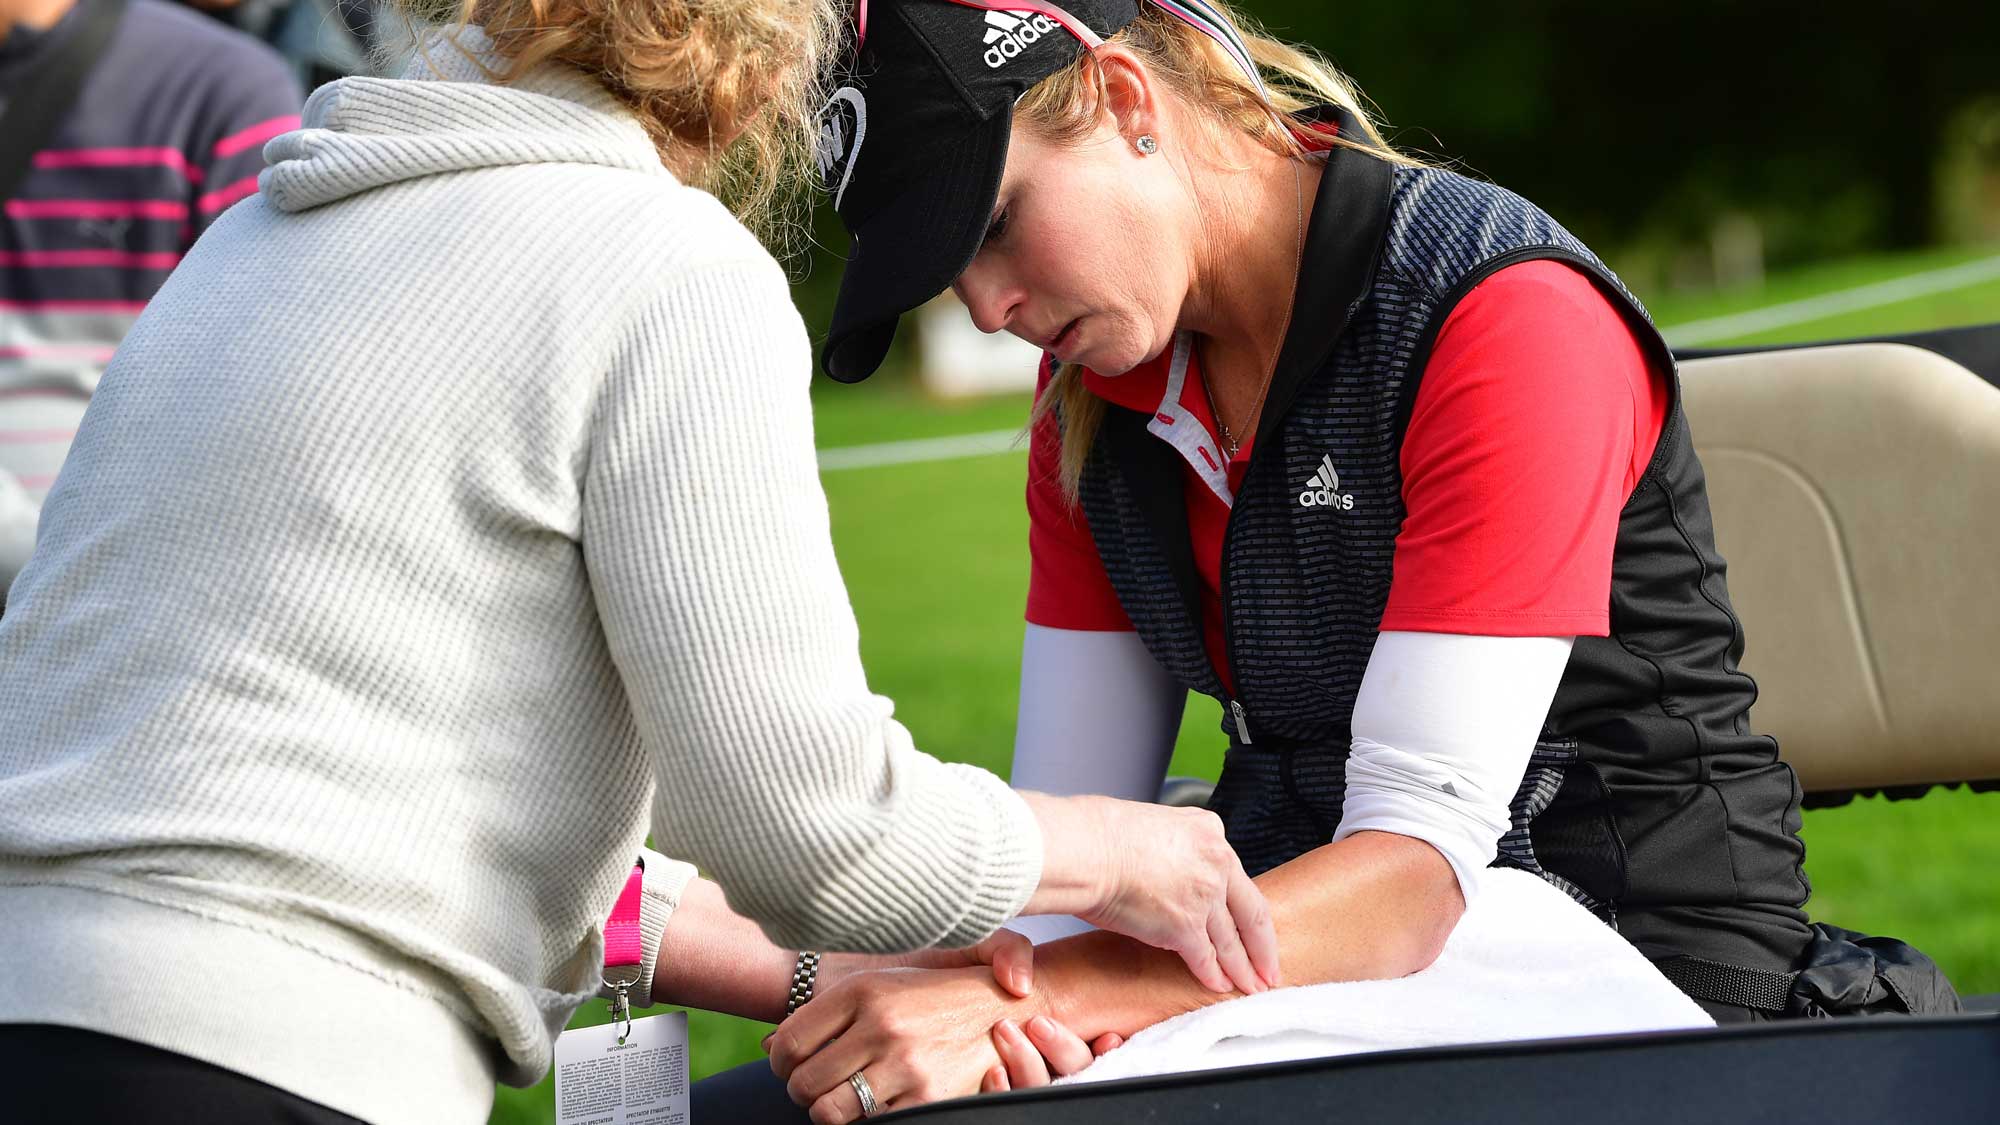 Paula Creamer of USA gets physio treatment for her sprained wrist during the weather delayed first round of The Evian Championship at Evian Resort Golf Club on September 15, 2017 in Evian-les-Bains, France.